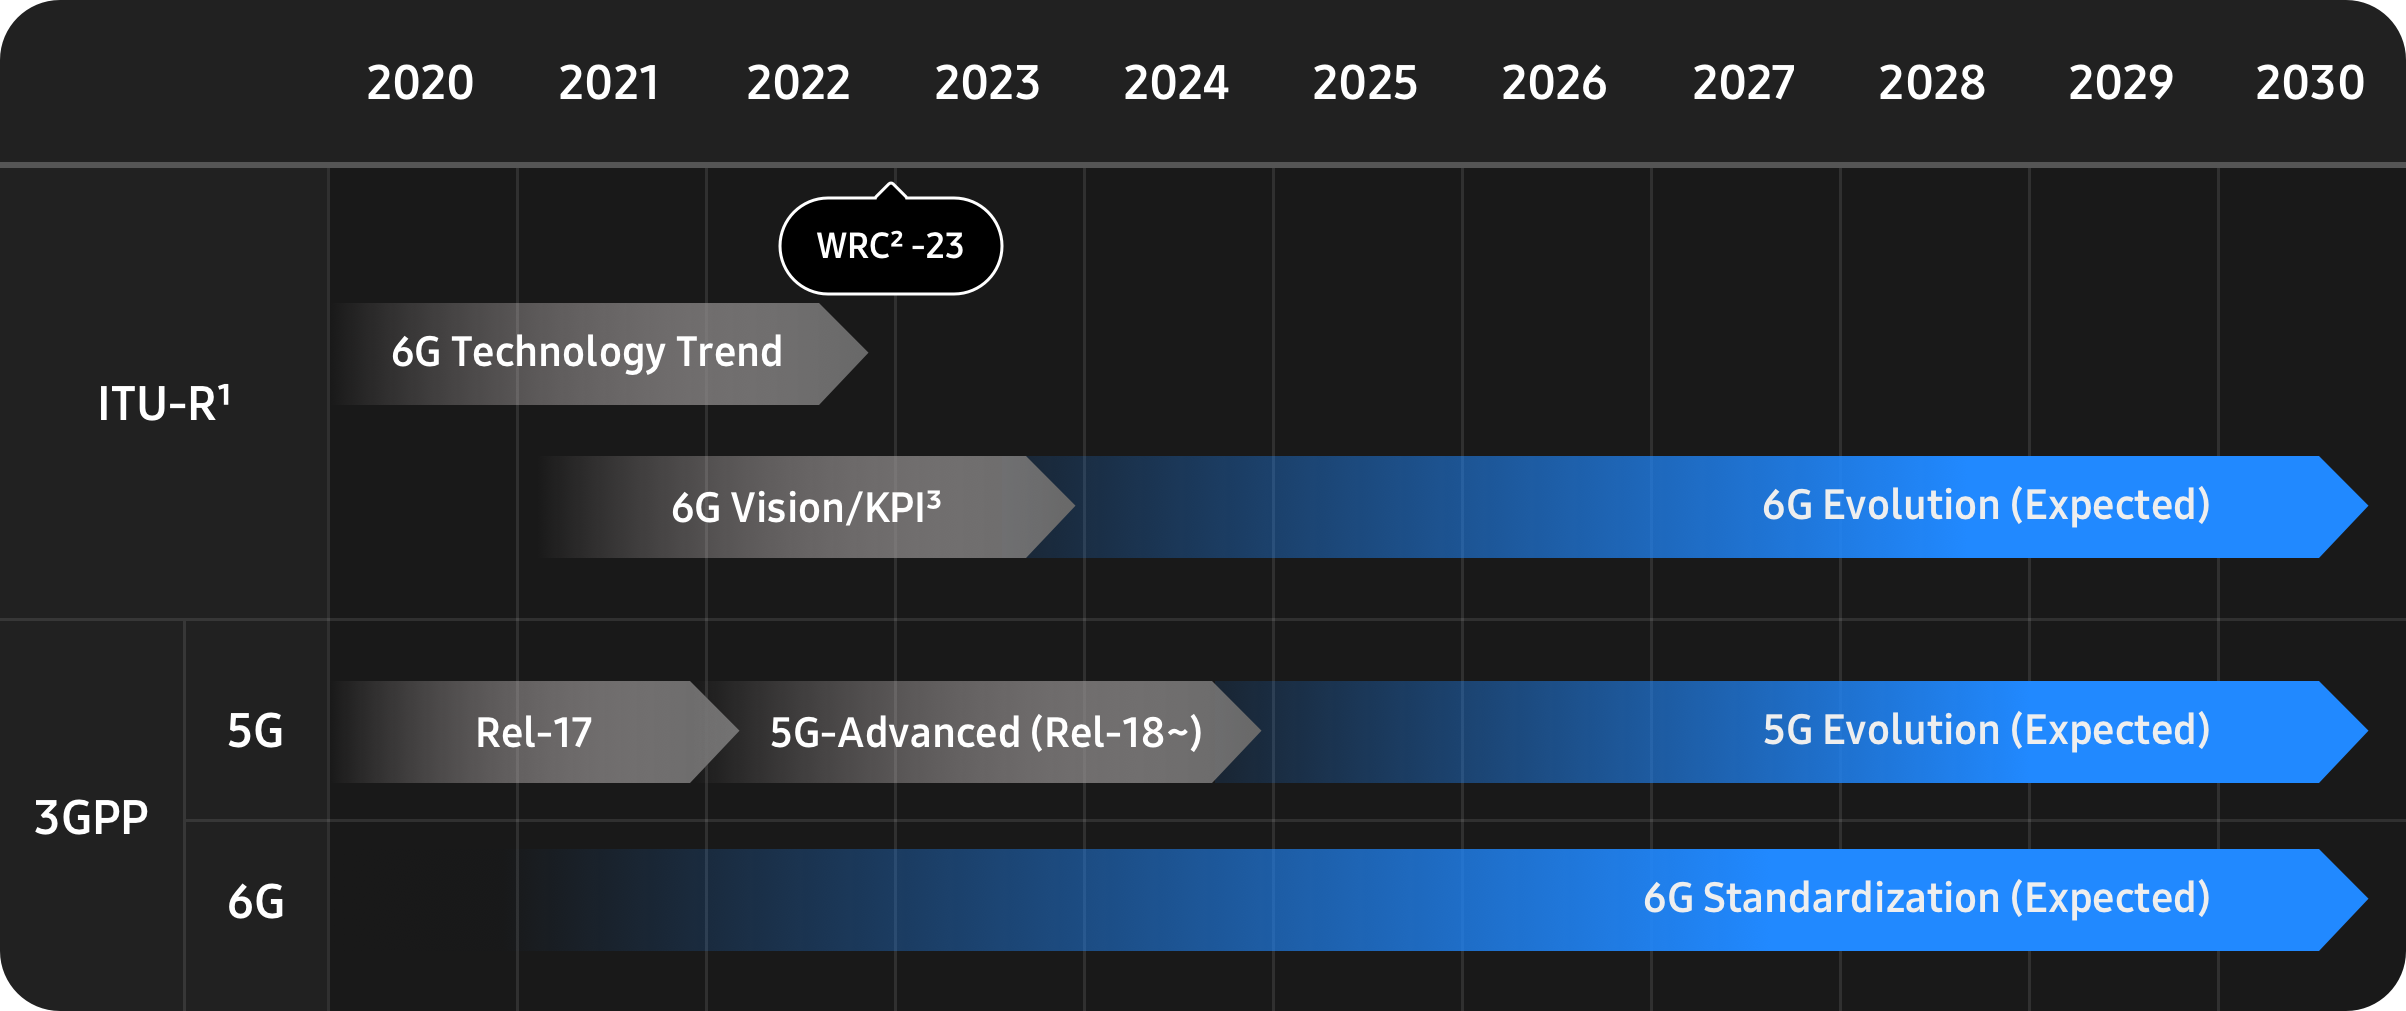 Samsung's expected 5G and 6G technology development roadmap